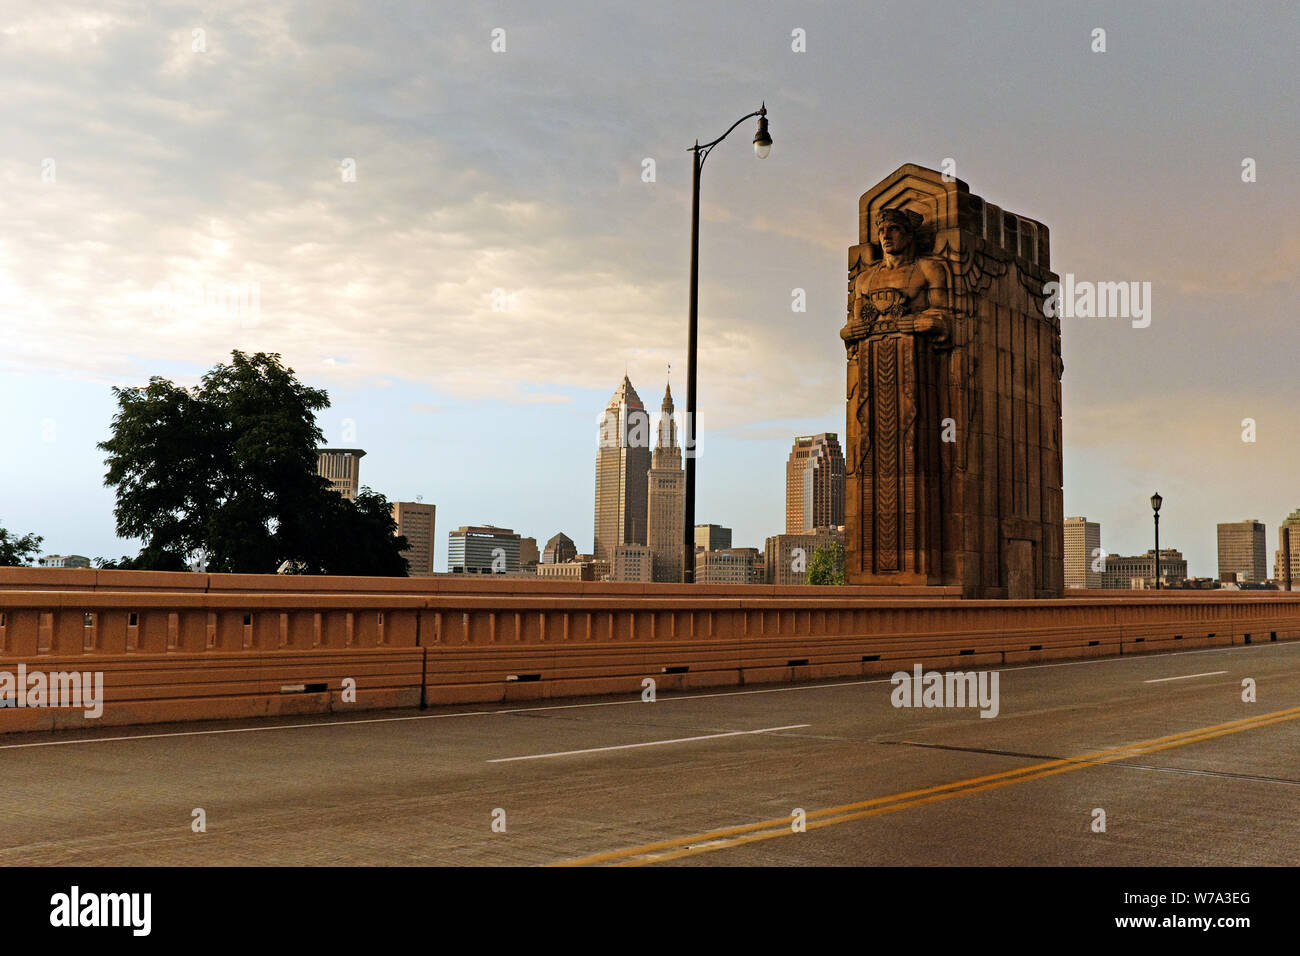 The downtown skyline as viewed from the Hope Memorial Bridge where one of the Art Deco 'Guardian of Traffic' towers above the road in Cleveland, Ohio. Stock Photo